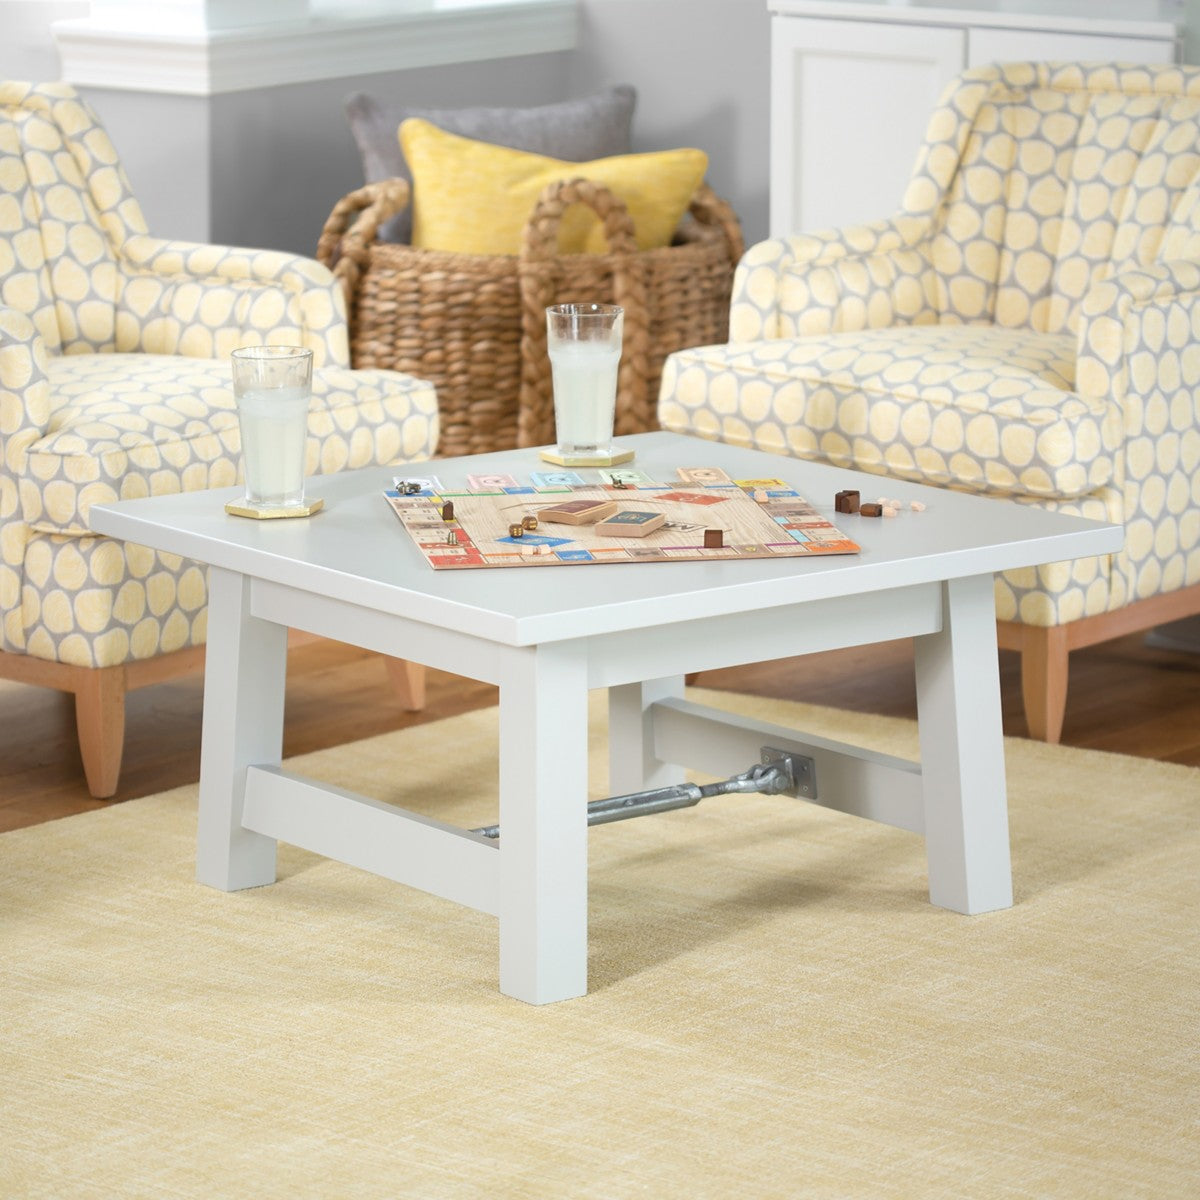 Maine Cottage Cable Lock Coffee Table by Maine Cottage | Where Color Lives 